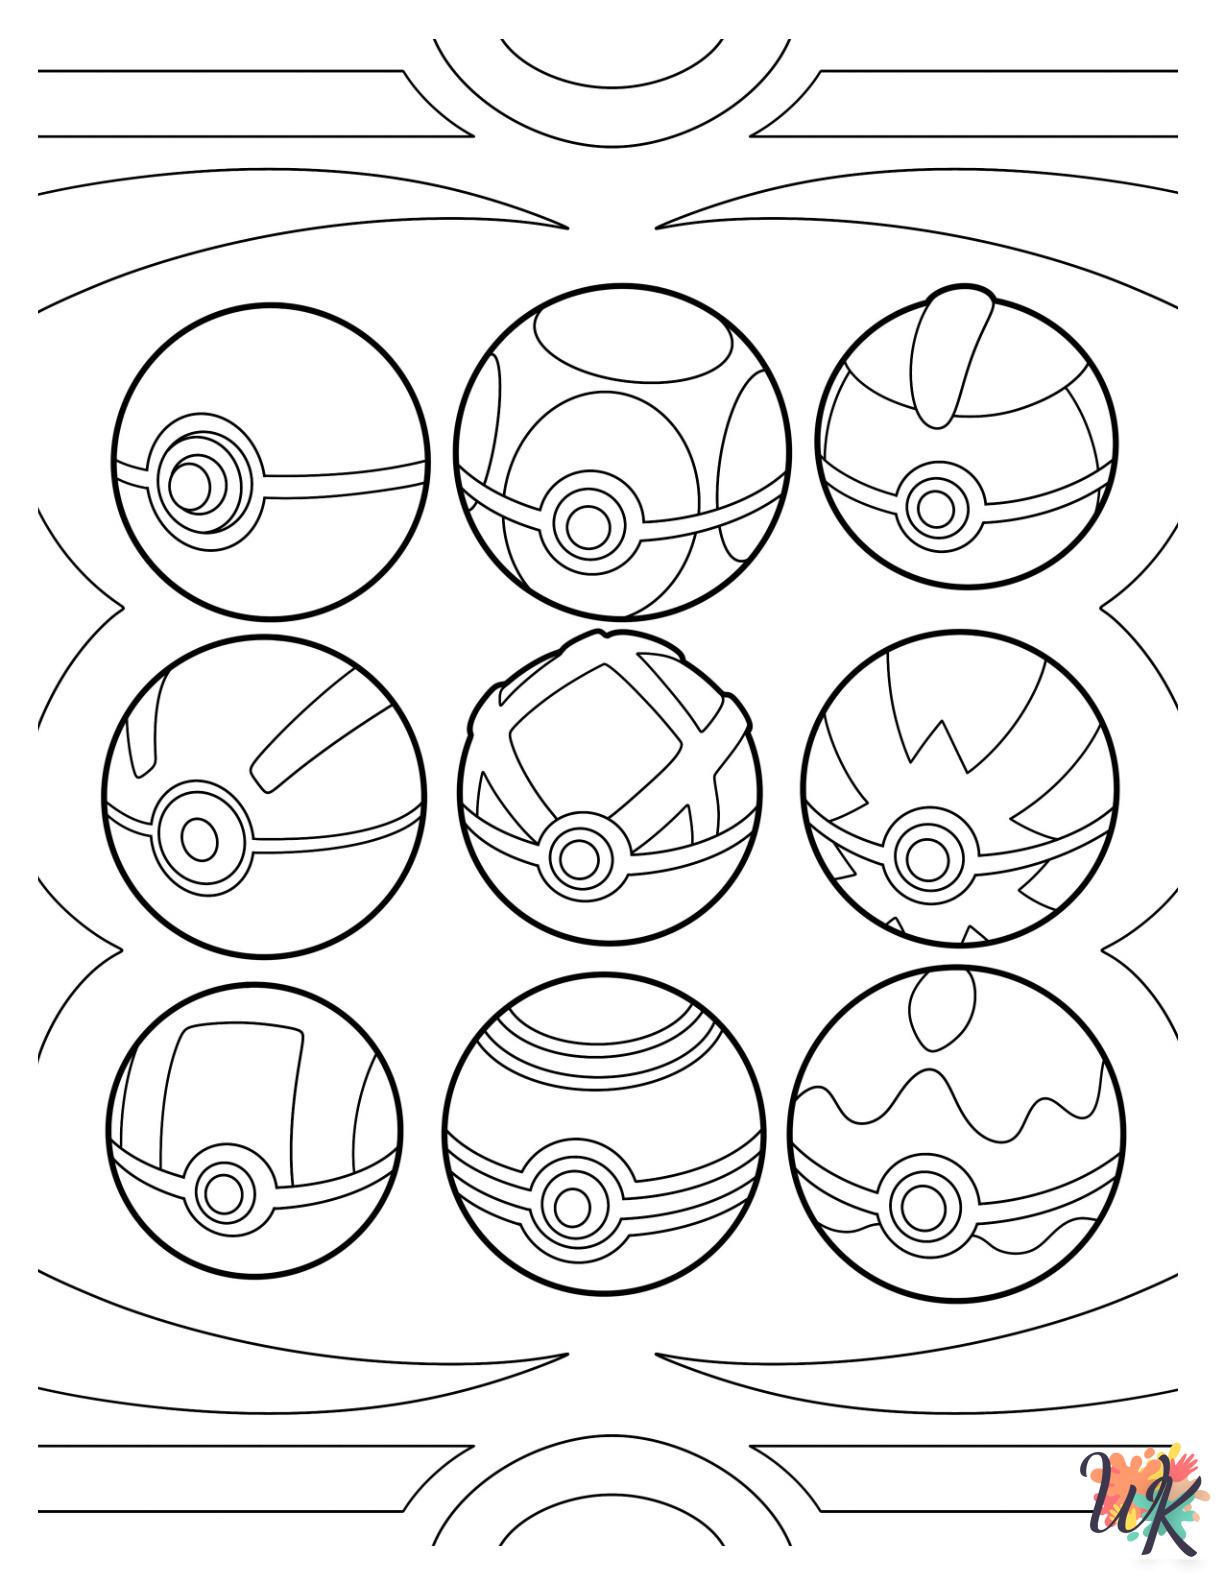 detailed Pokeball coloring pages for adults